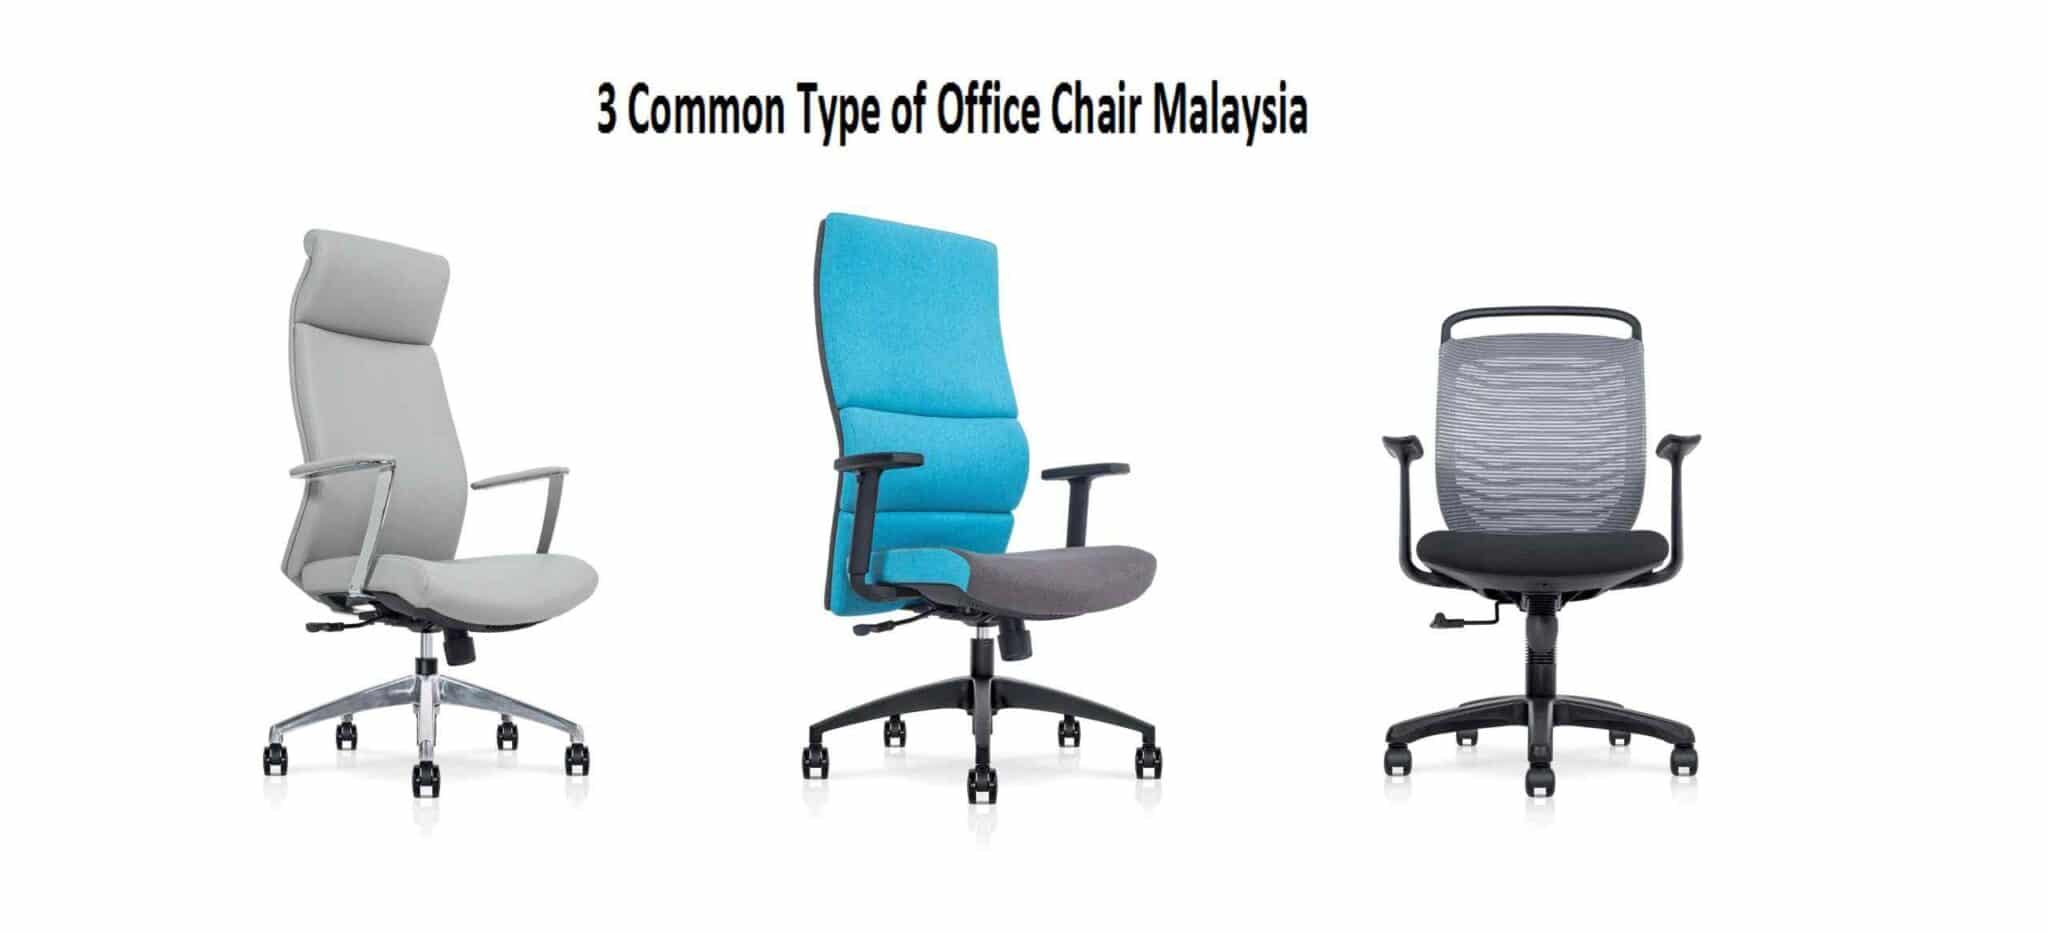 3 Common Type of Office Chair Malaysia